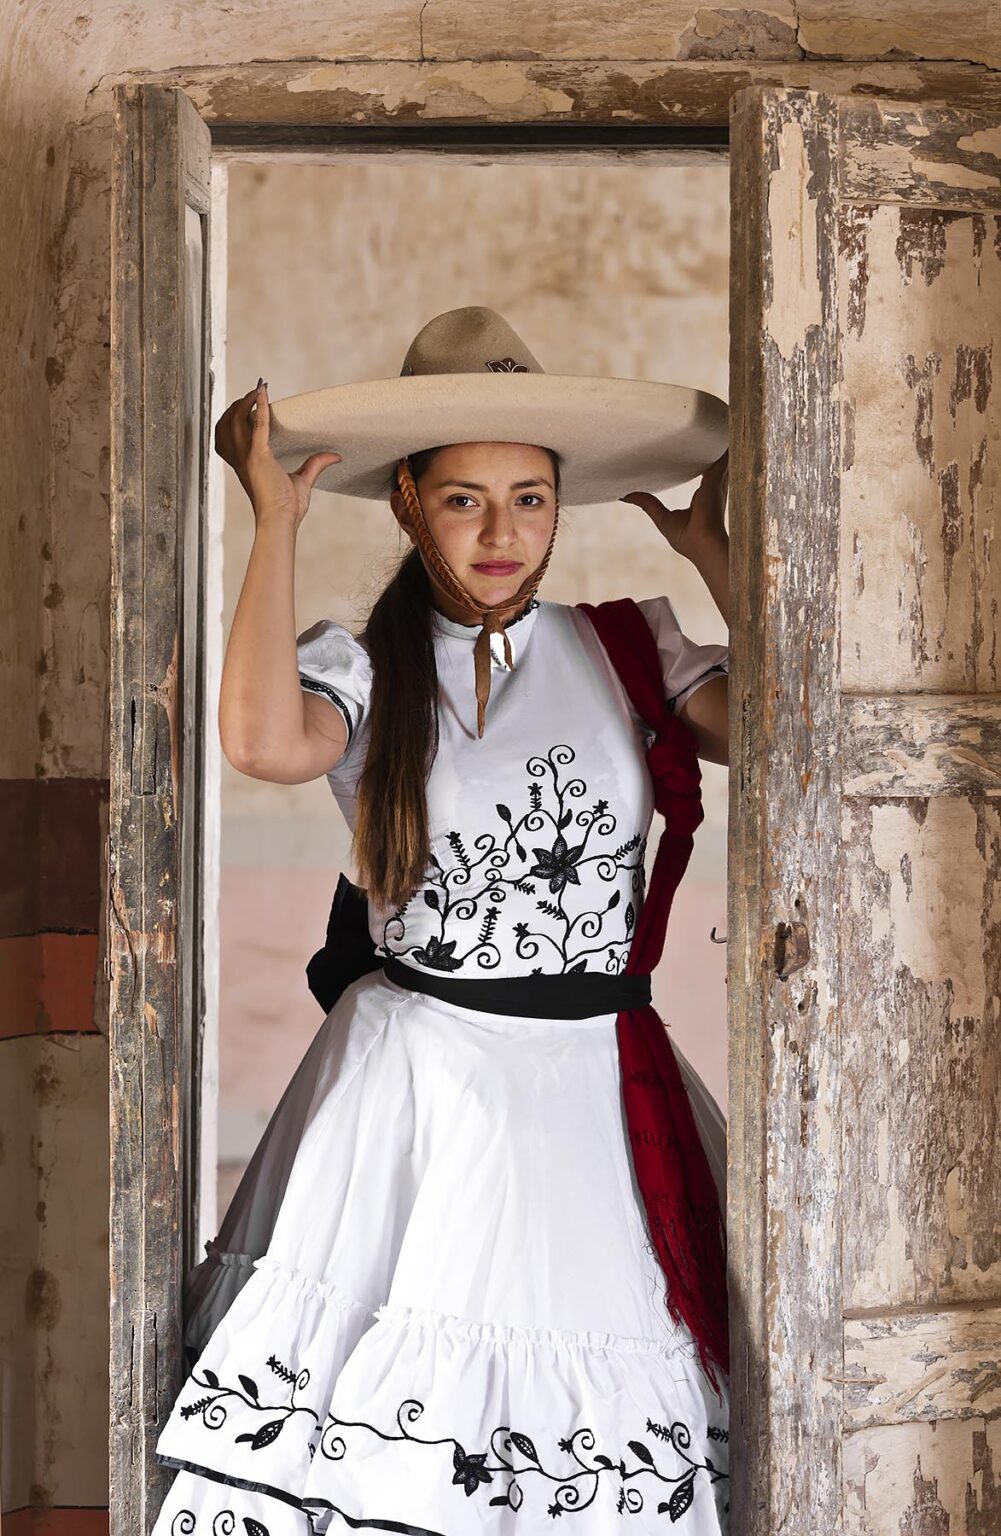 A Mexican girl wears a tradtional horse riding outfit at an old hacienda - SAN FELIPE, MEXICO